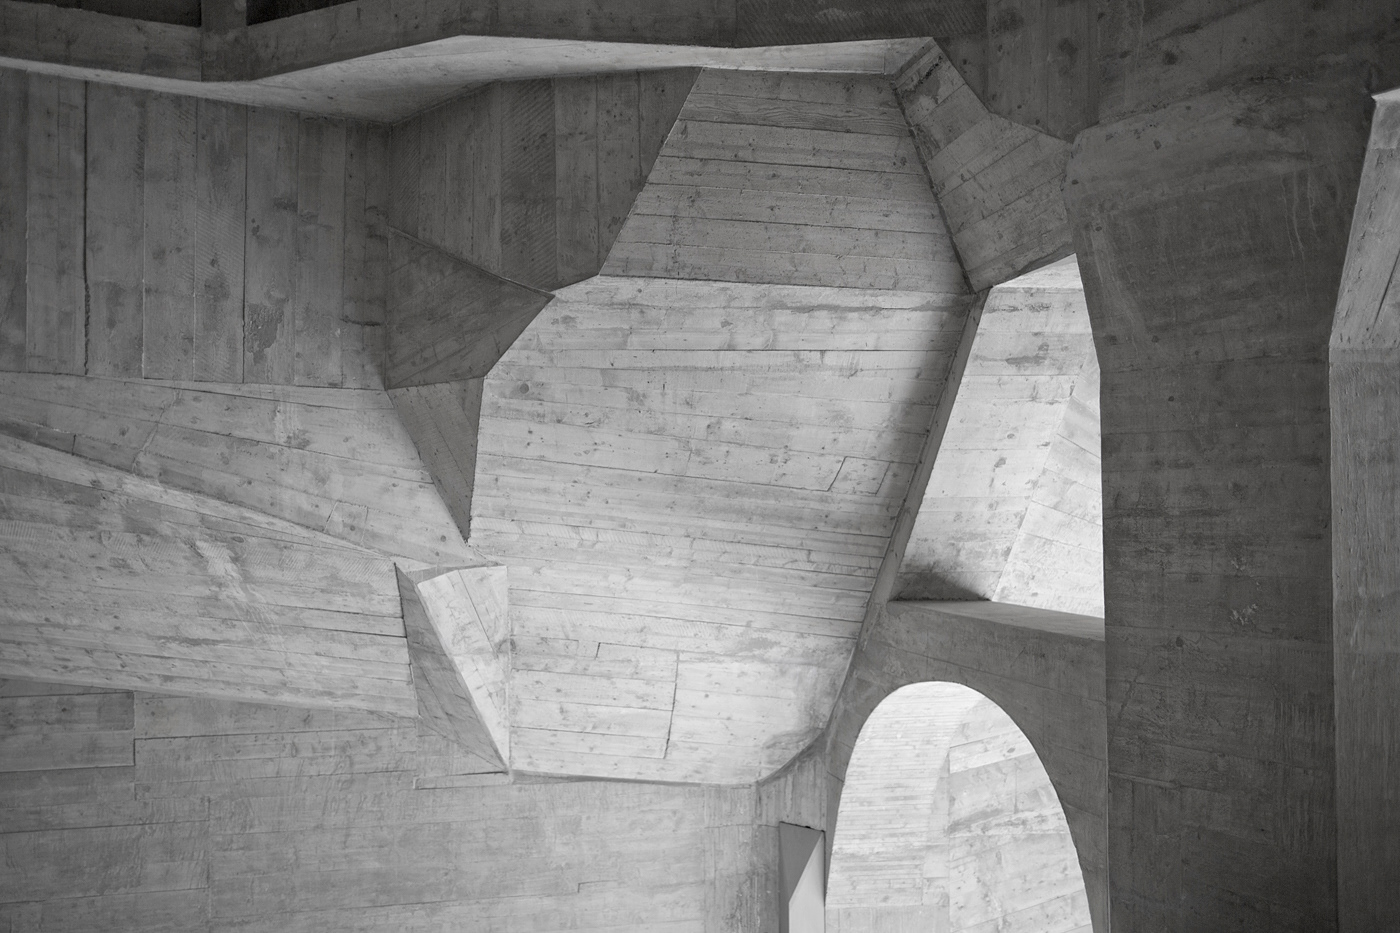 Staircase contemporary architecture concrete anthroposophy fine art Basel blackandwhite art structure Expressionism